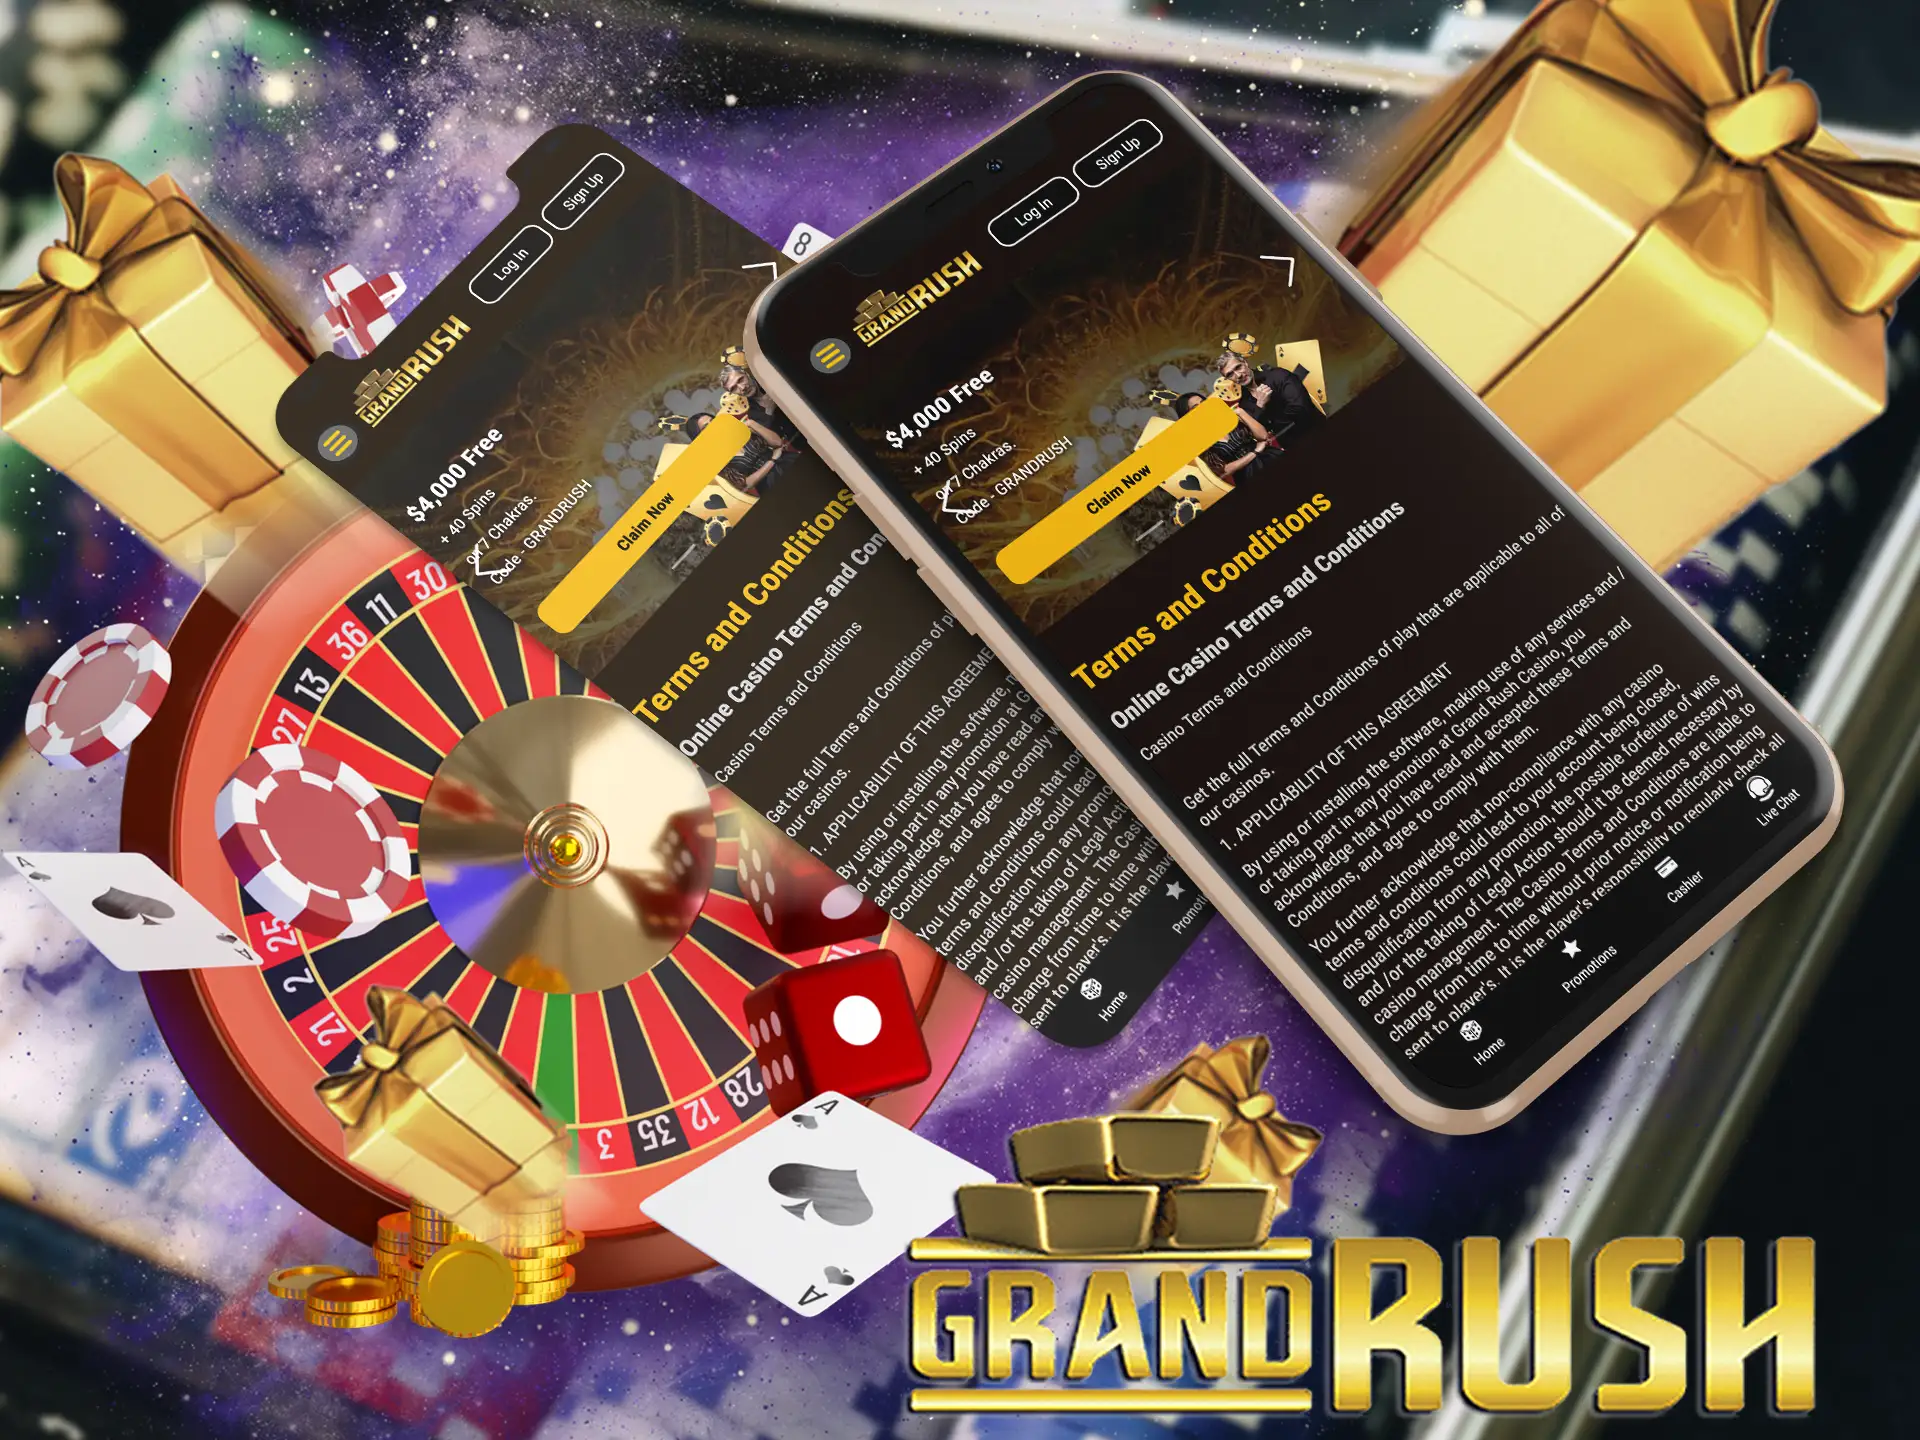 There a lot of bonuses for new and existing players in Grand Rush app.